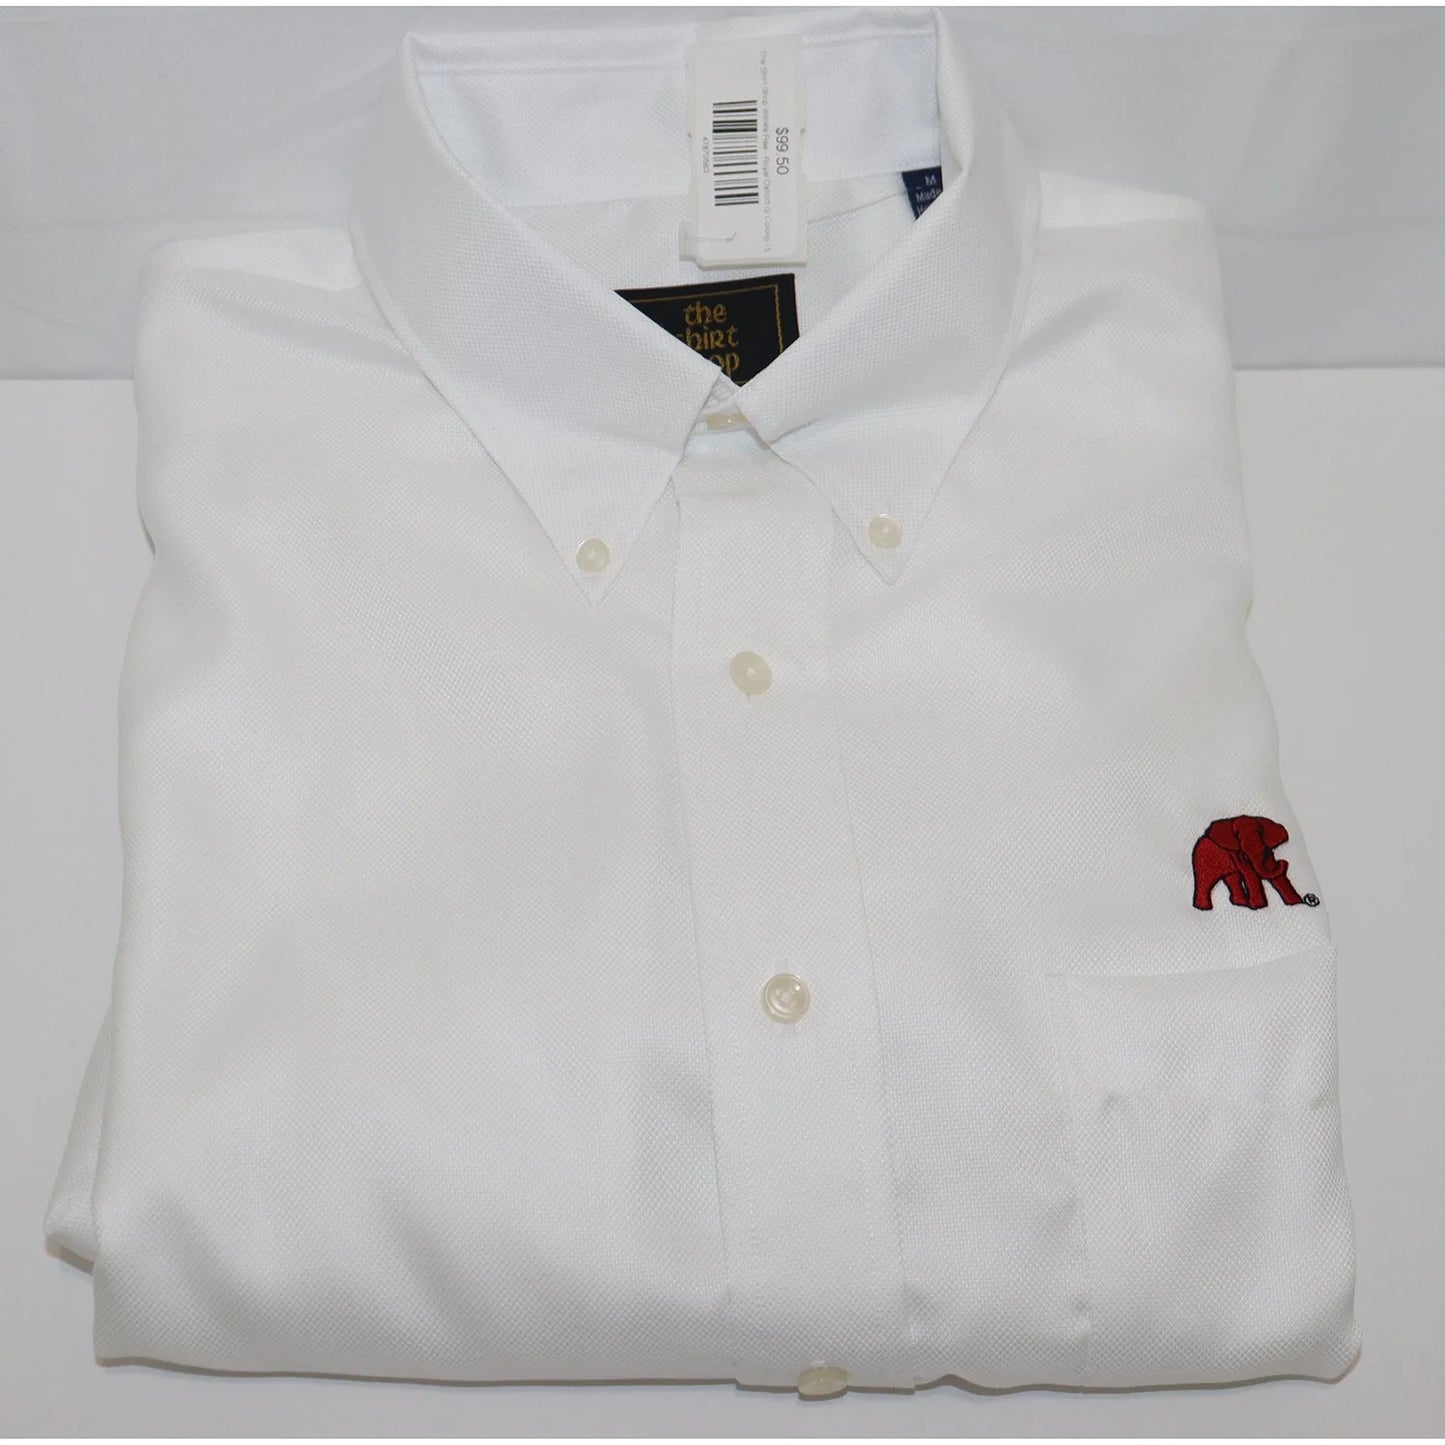 The Shirt Shop Wrinkle Free - Royal Oxford (2 Colors)